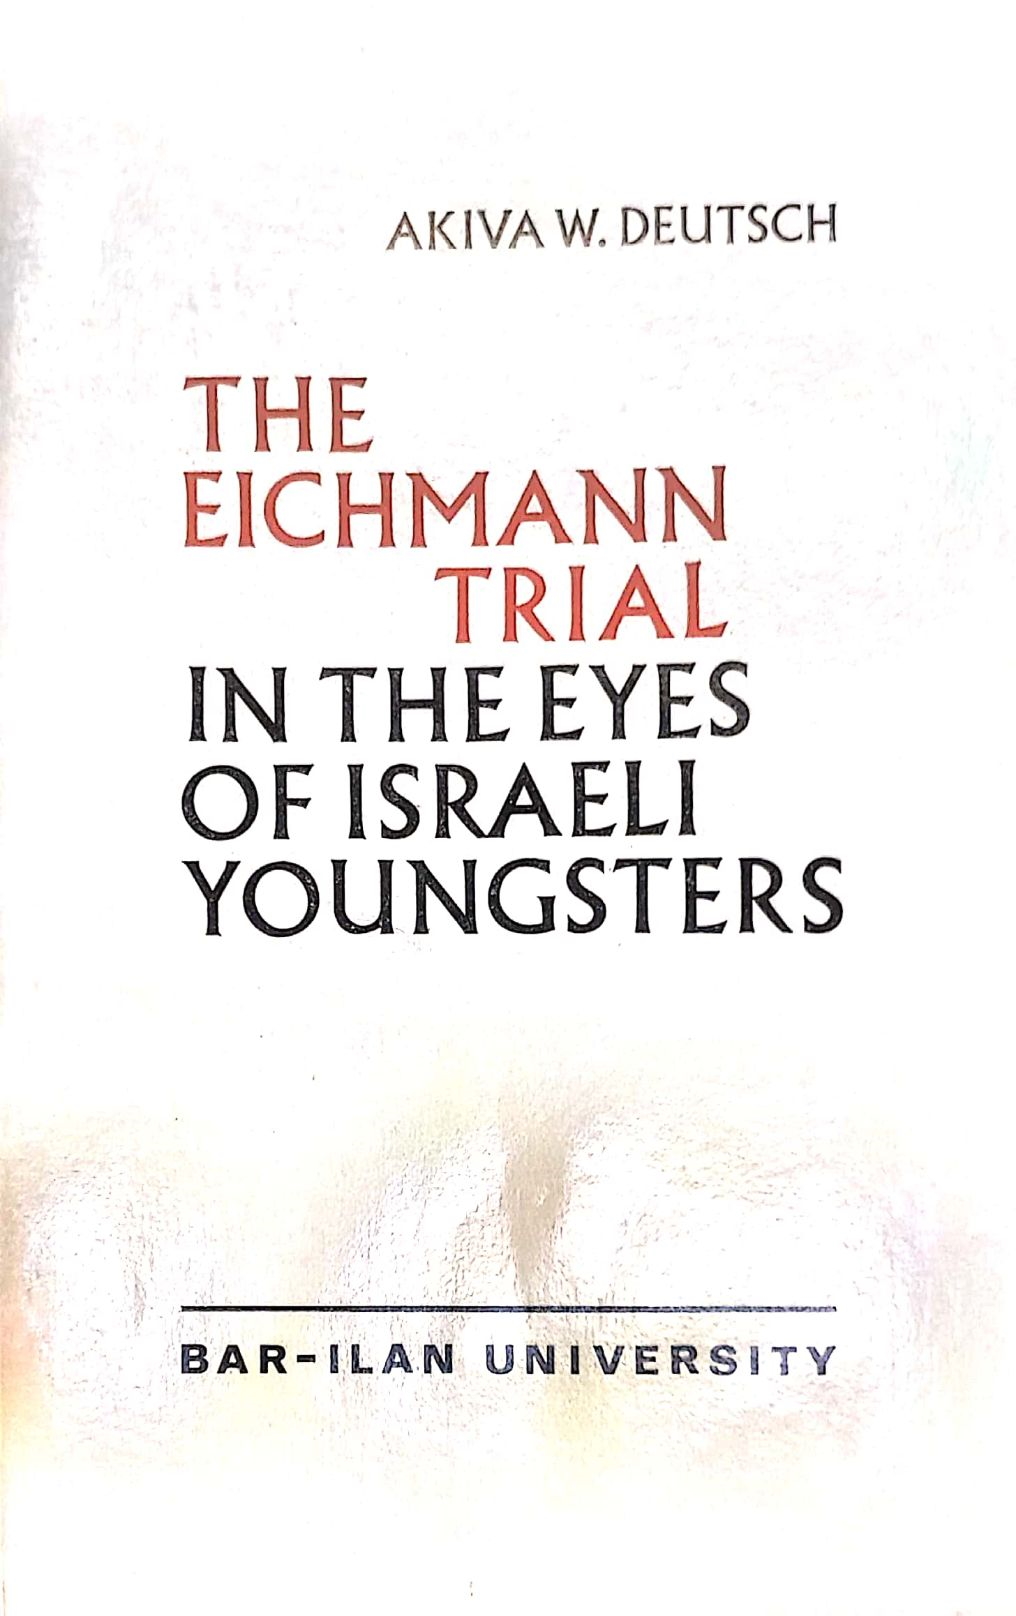 The Eichmann Trial in the Eyes of Israeli Youngsters